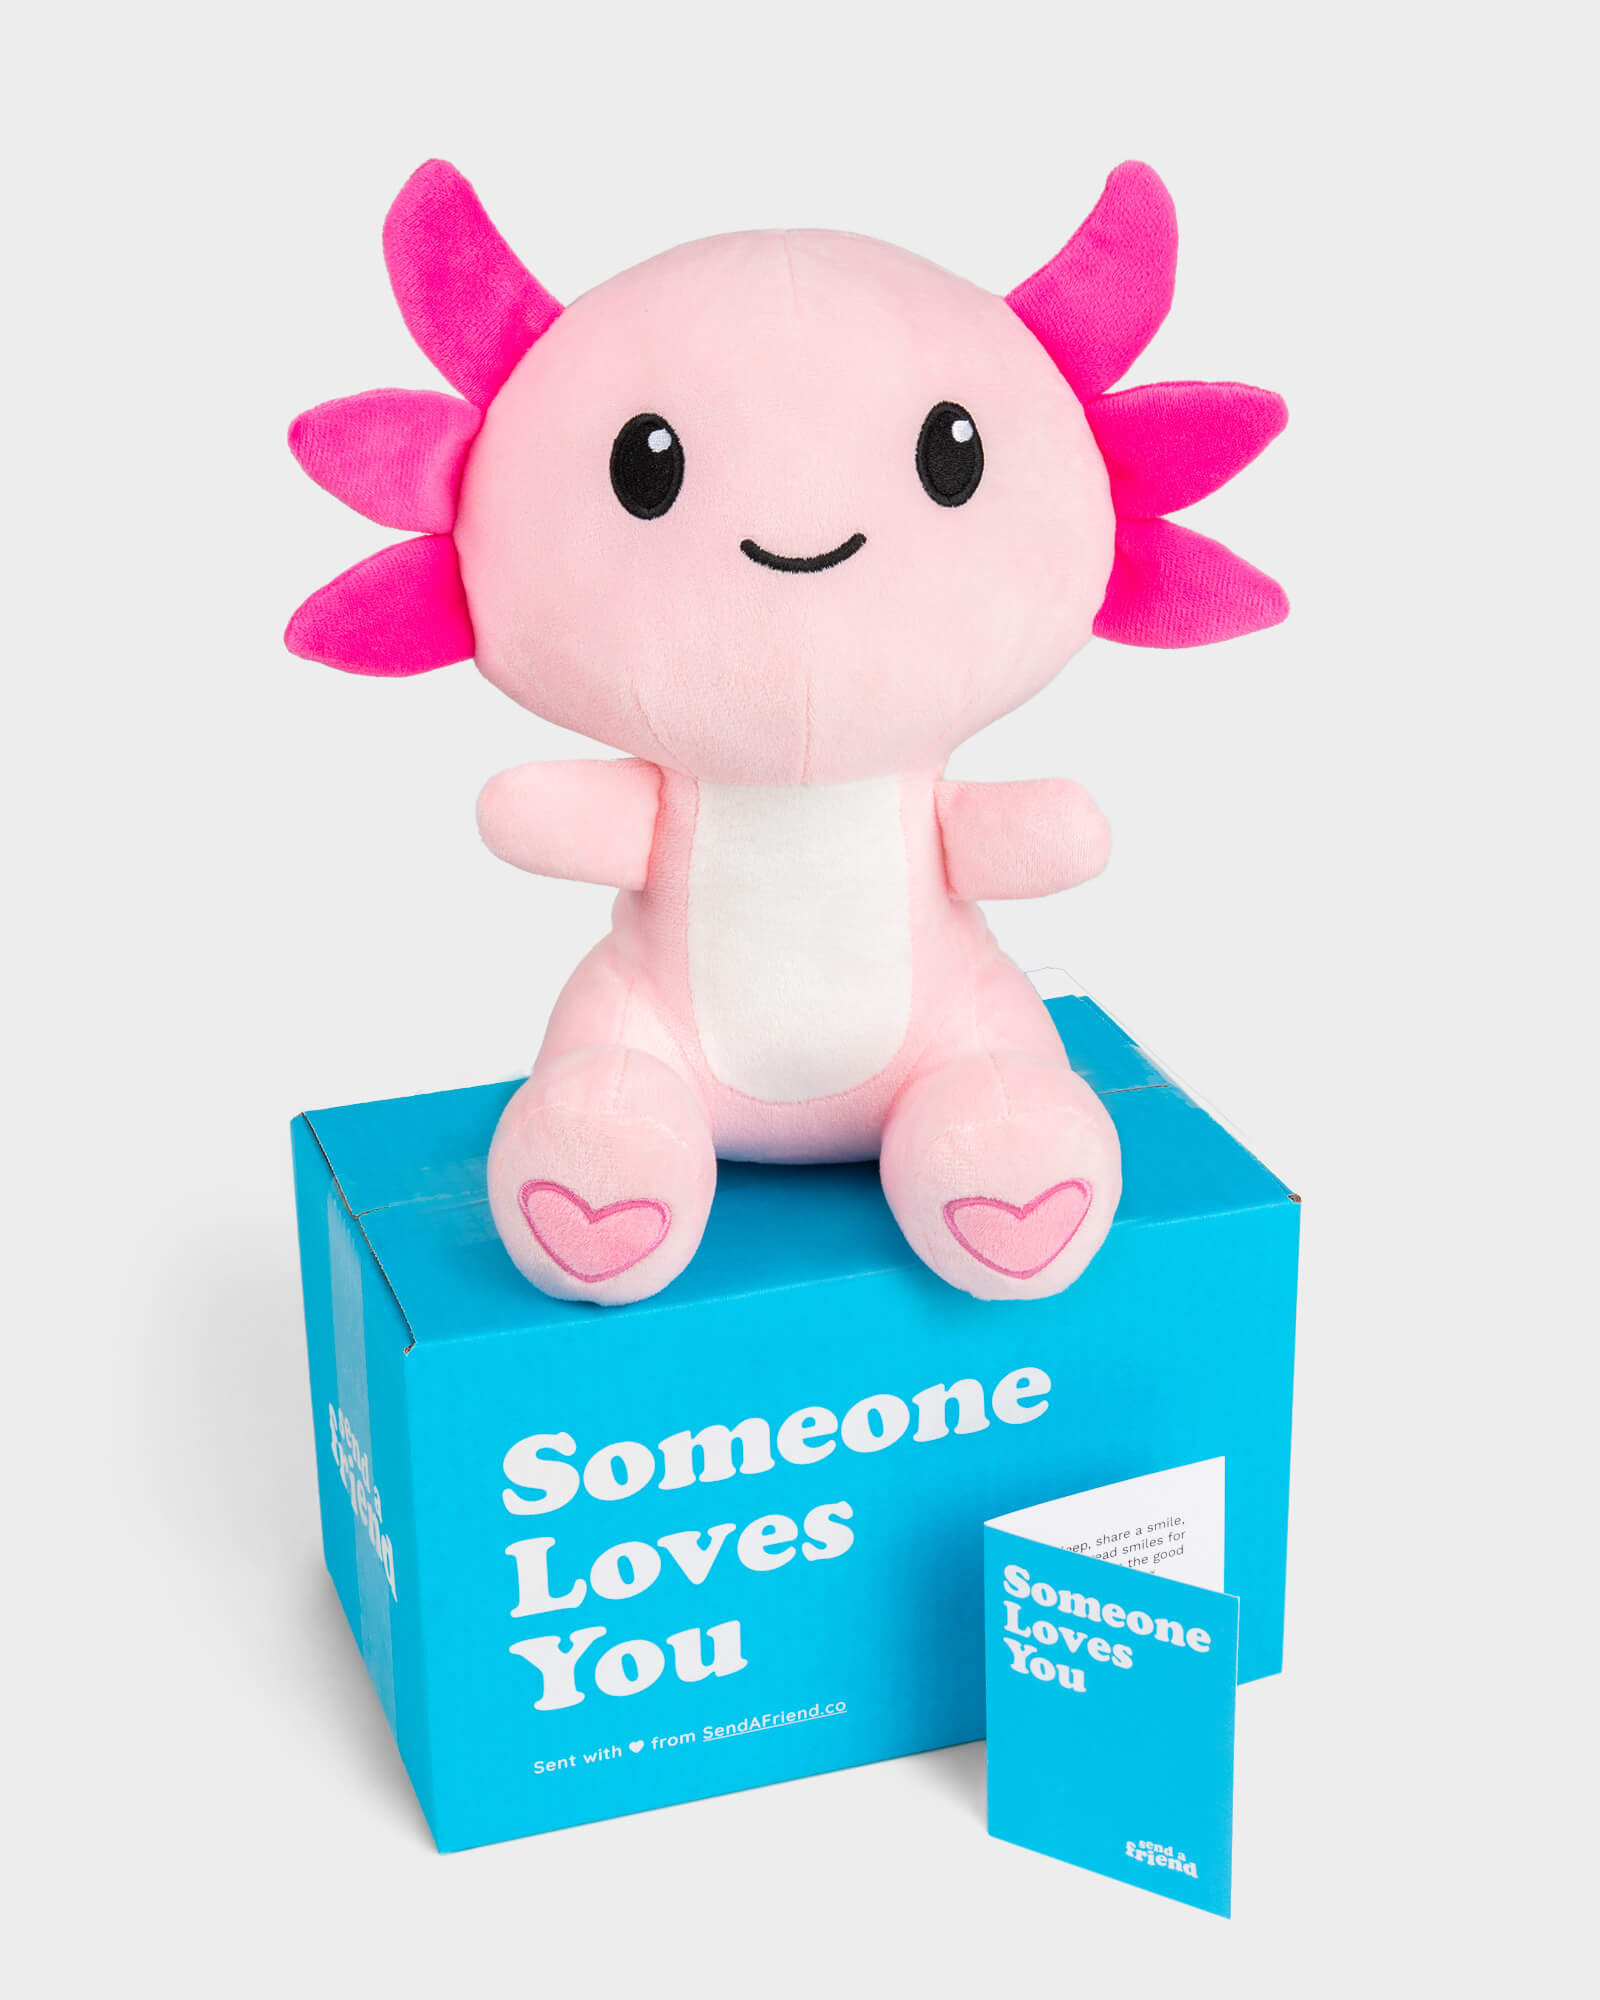 Axolotl pet lover gifts definition. Perfect present for mother dad